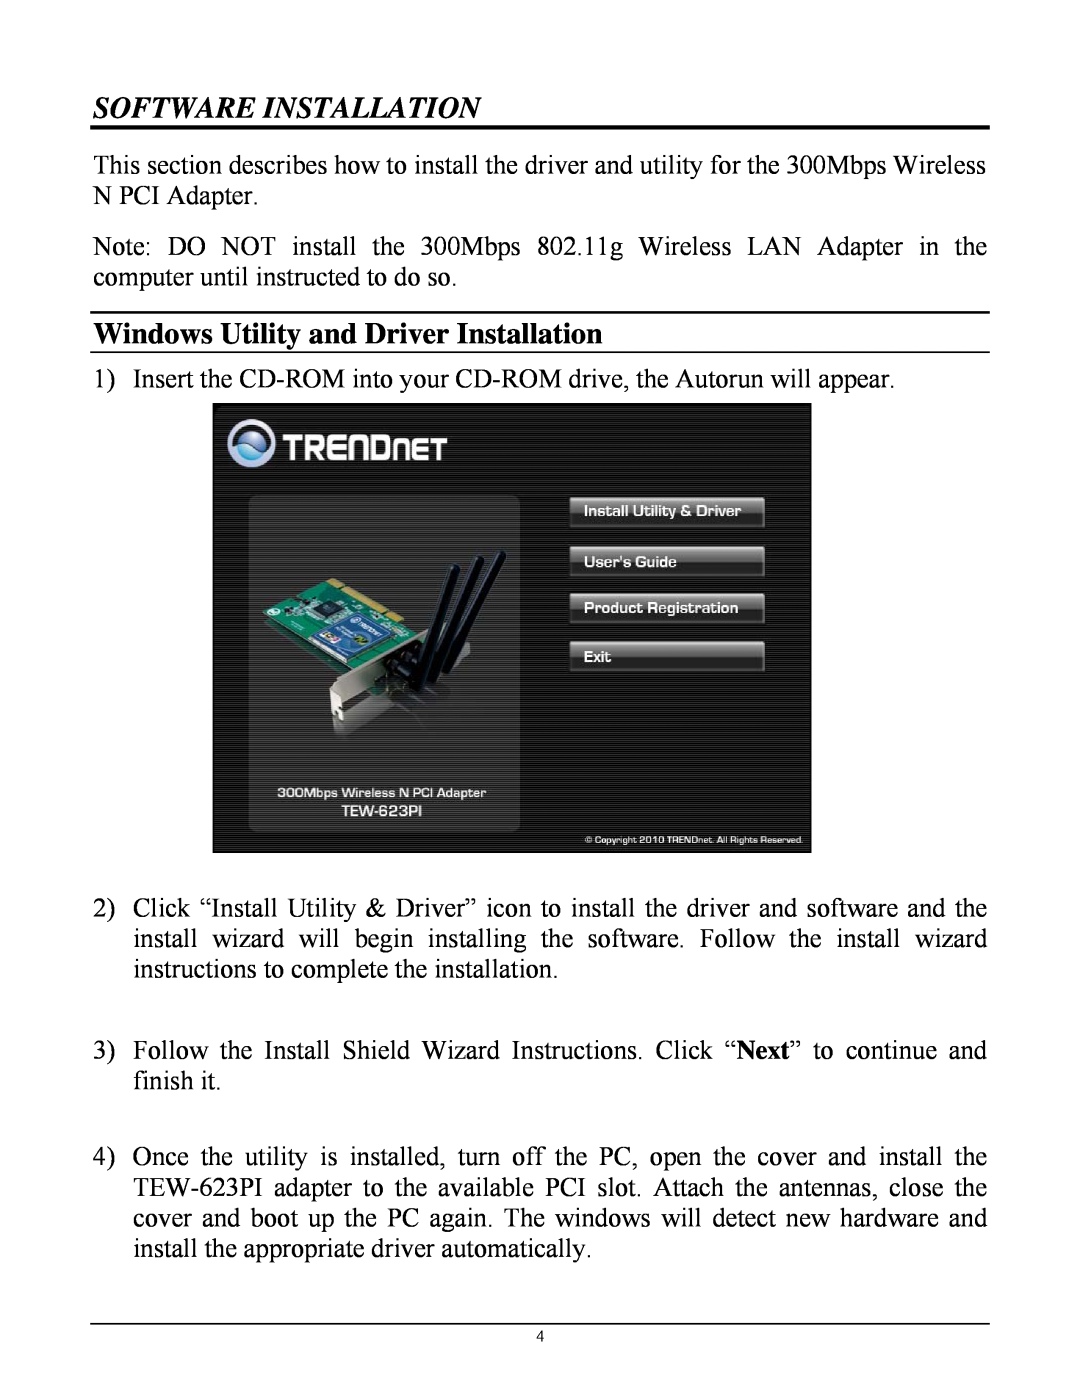 TRENDnet TEW623PI manual Software Installation, Windows Utility and Driver Installation 